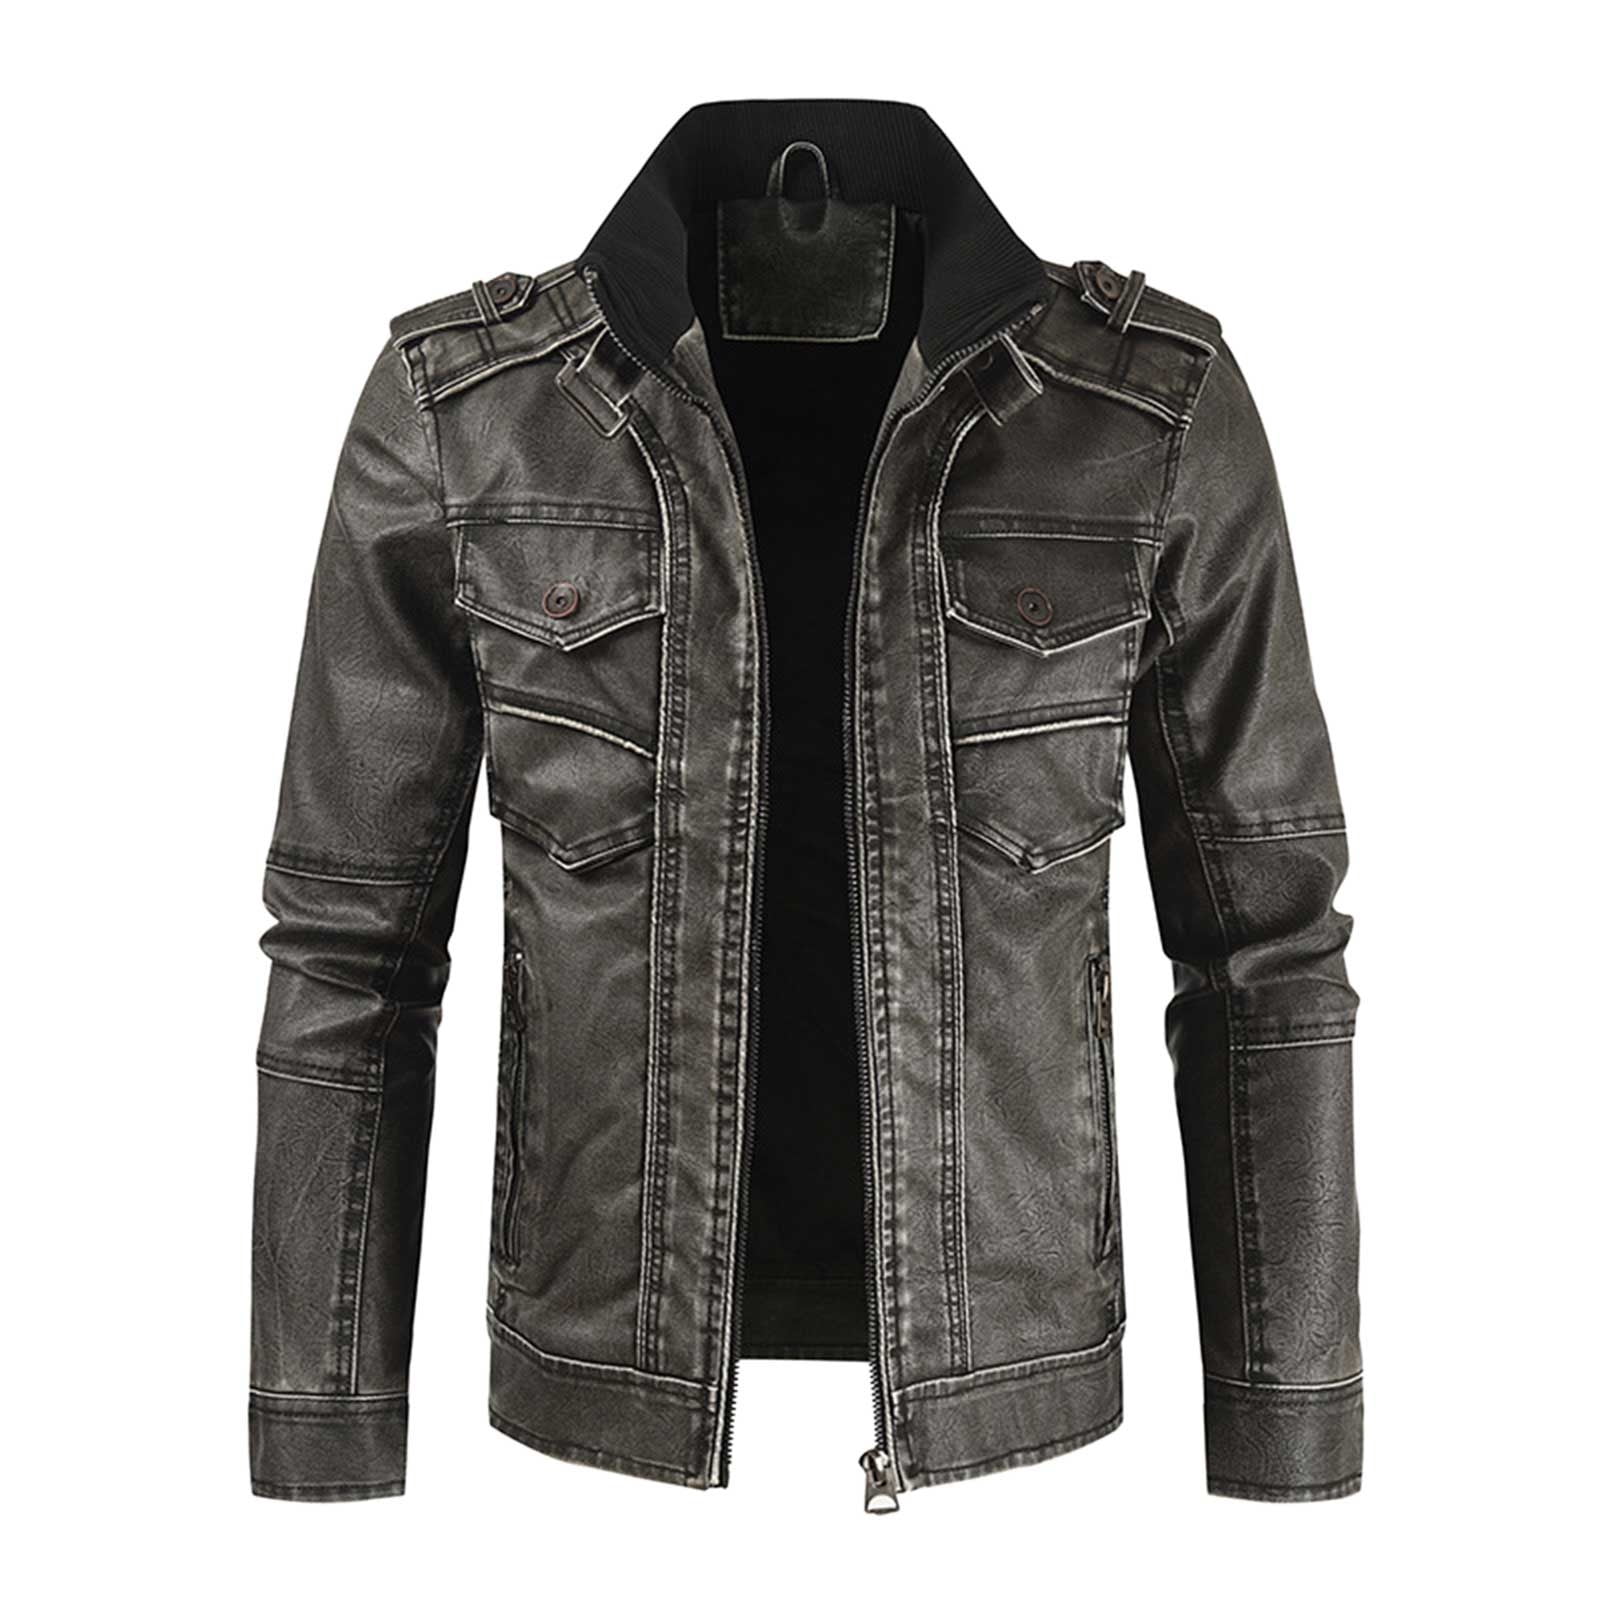 YYDGH Men's Long Sleeve Plus Size Lapel Leather Jacket Casual Faux Leather  Motorcycle Jacket Outerwear Coat with Zipper Pockets Black 4XL 